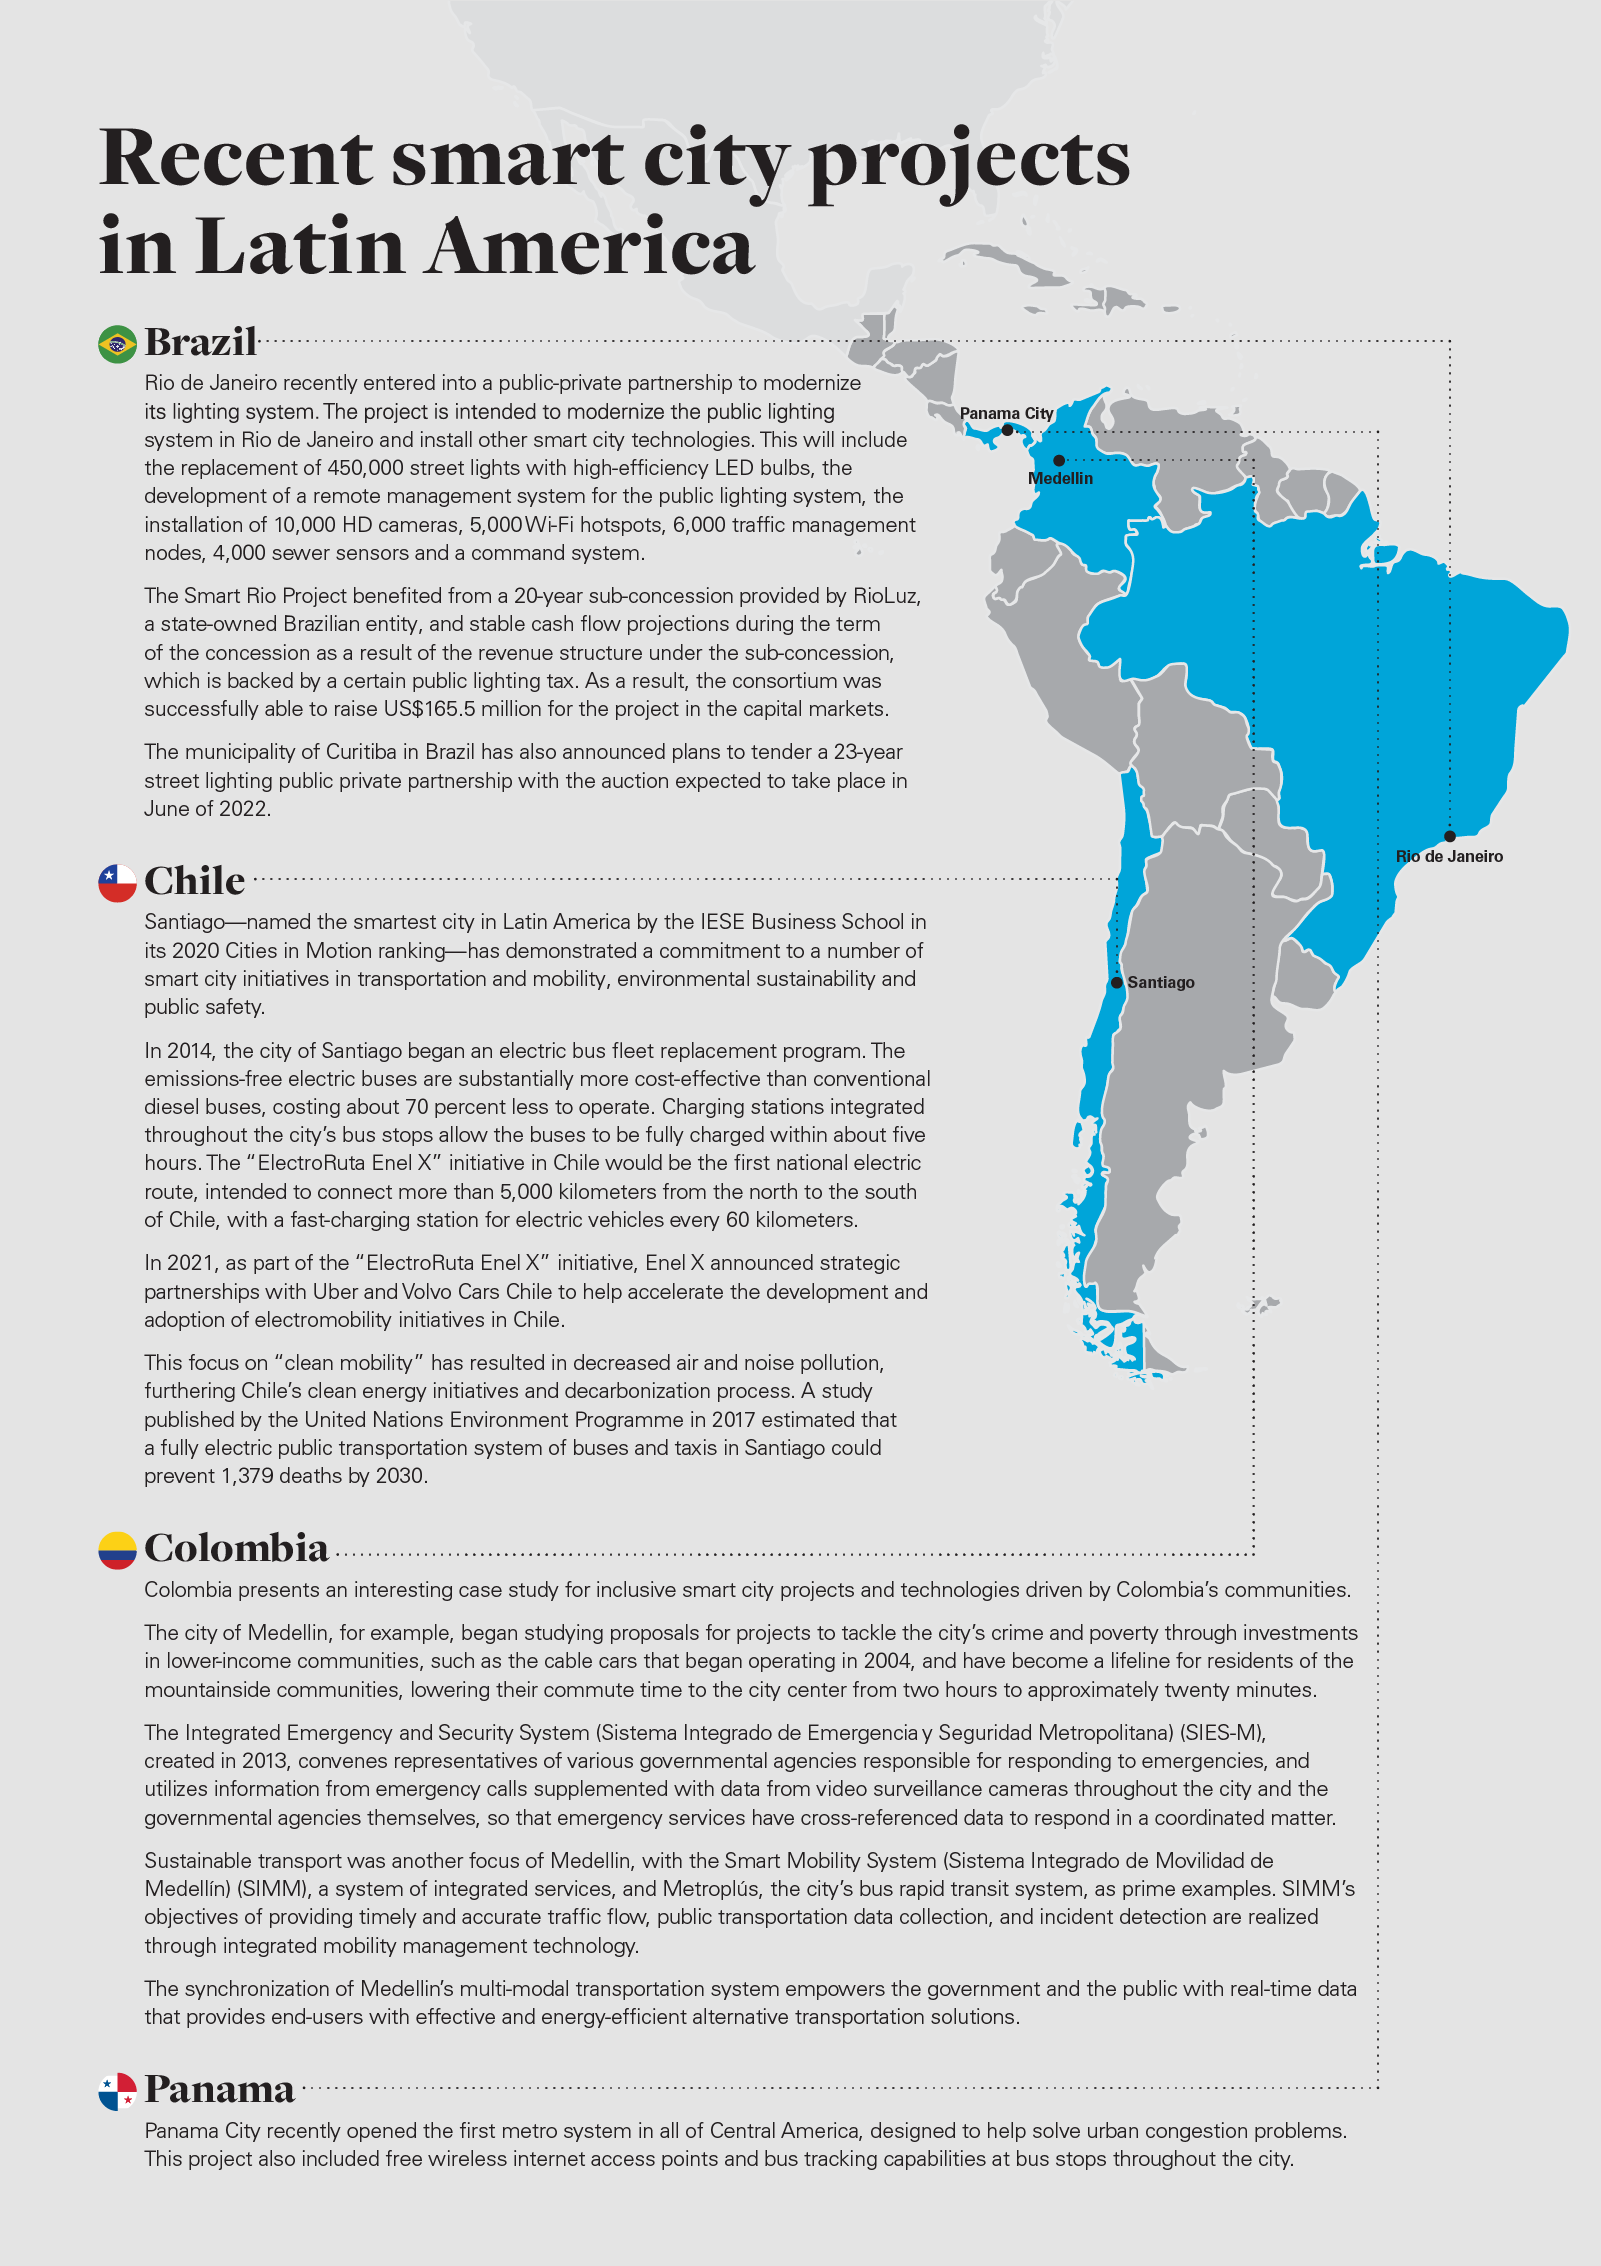 Recent smart city projects in Latin America